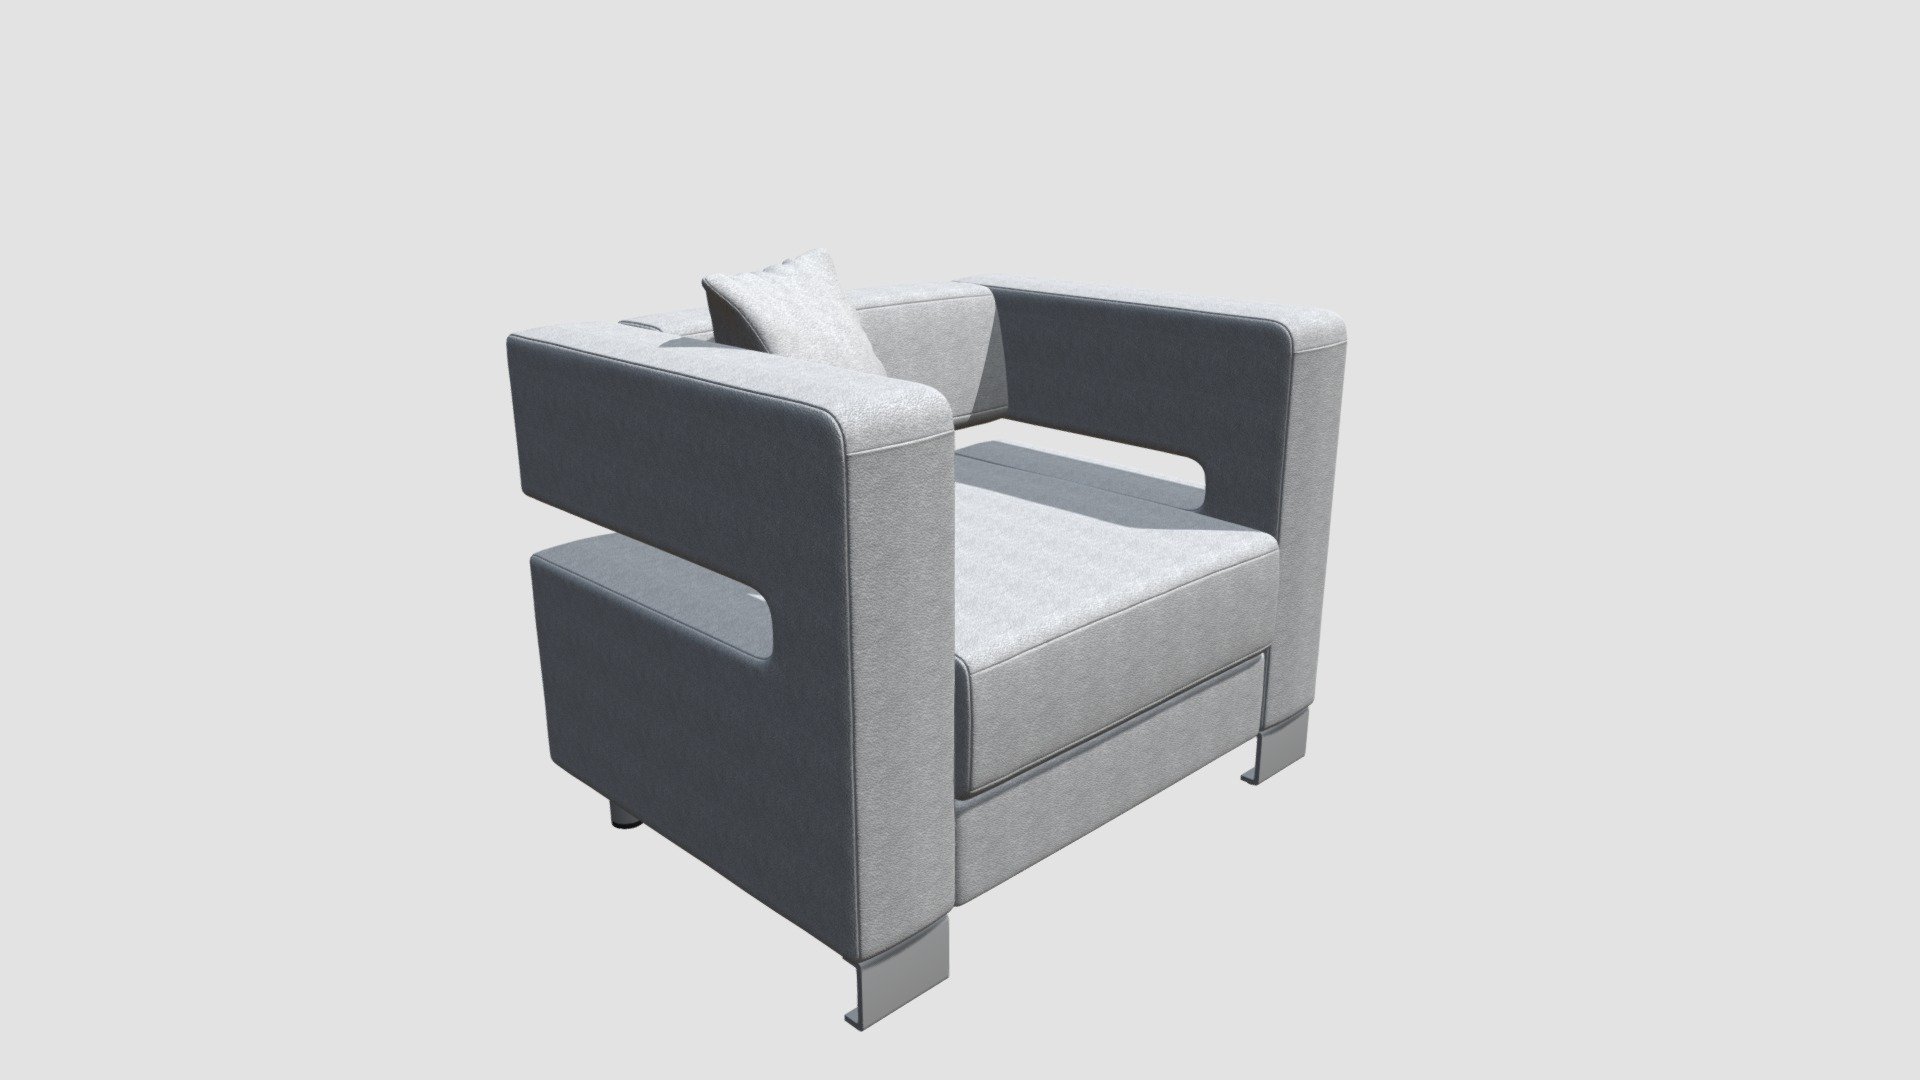 Highly detailed model of furniture with all textures, shaders and materials. It is ready to use, just put it into your scene 3d model